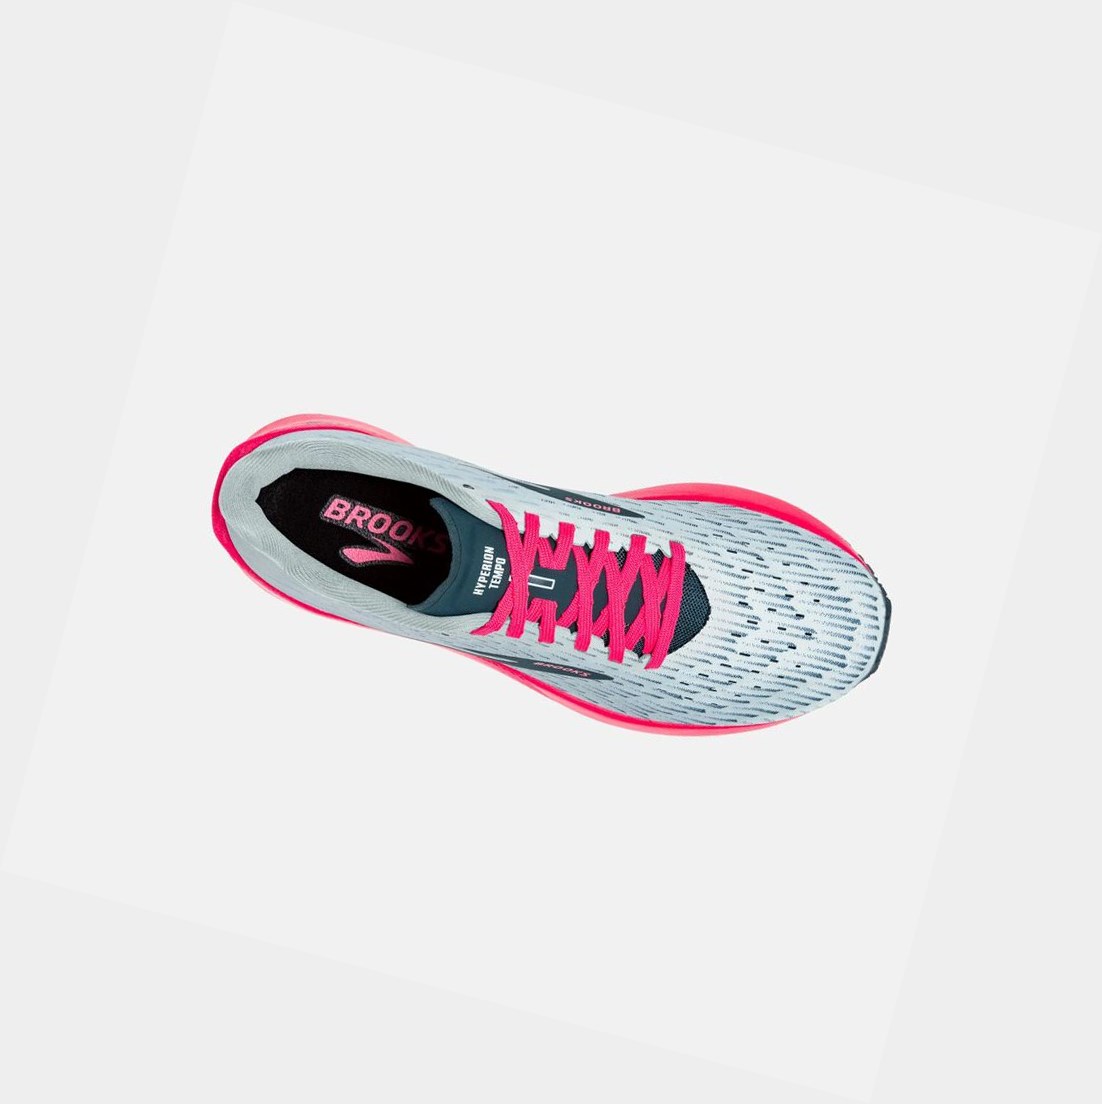 Brooks Hyperion Tempo Women's Road Running Shoes Ice Flow / Navy / Pink | VISH-52138